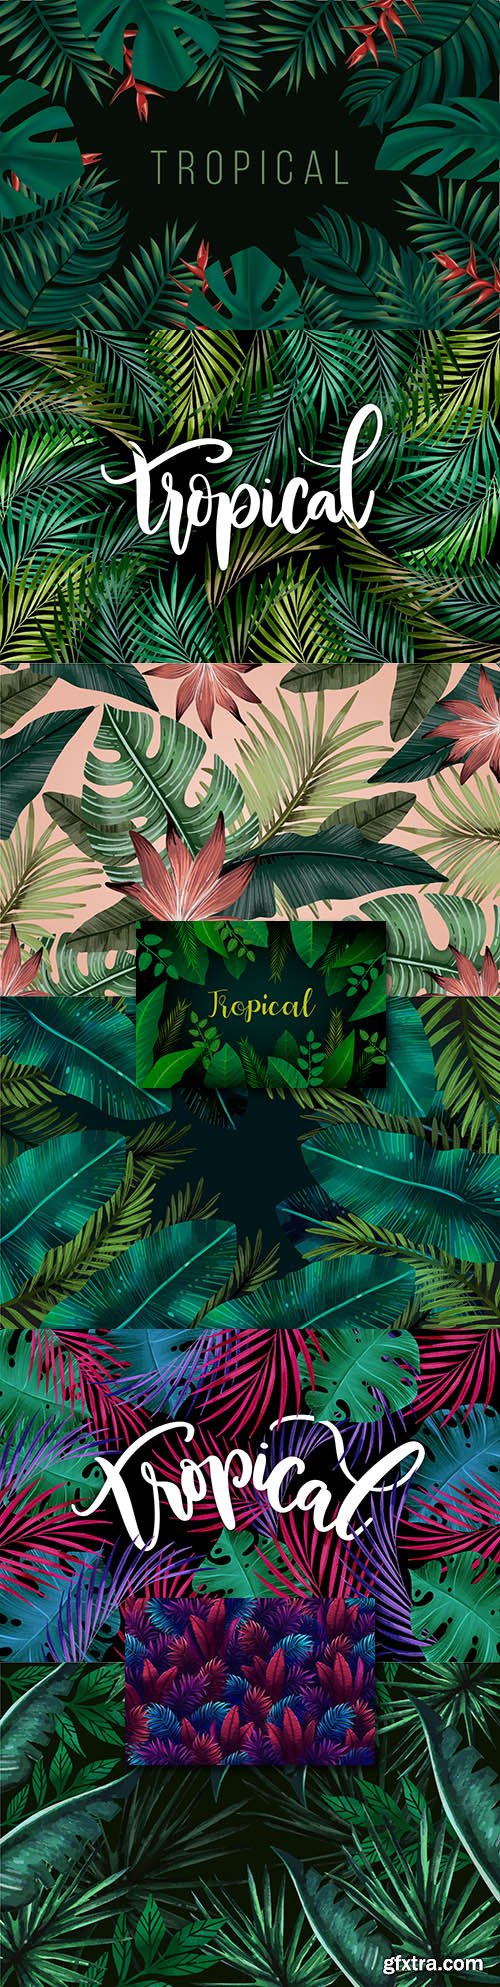 Summer tropical leaves and inscriptions decorative background